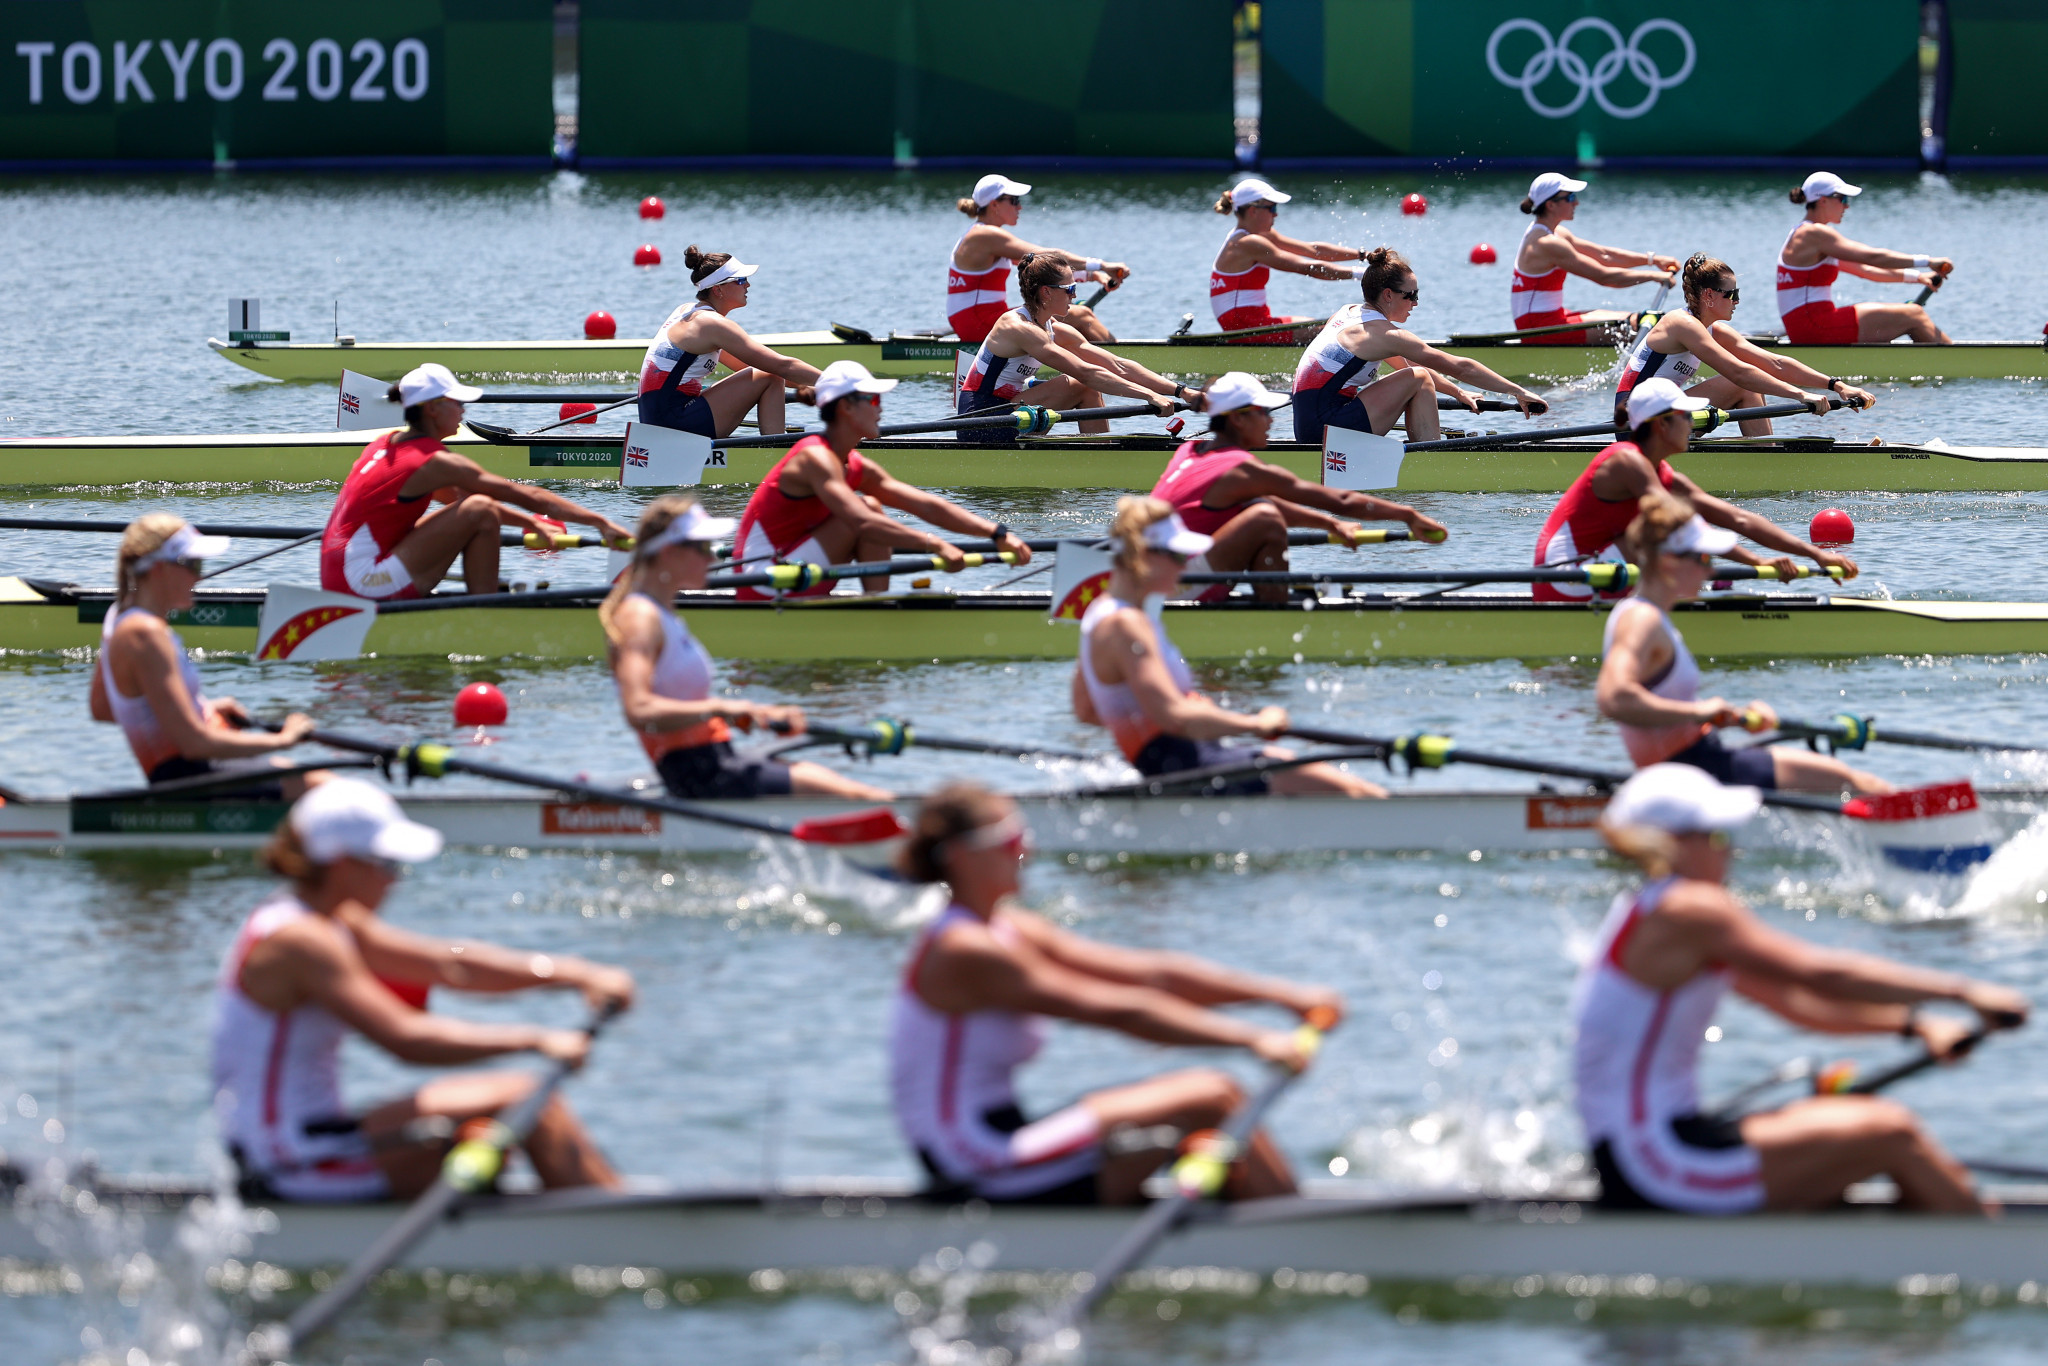 Nominations open for World Rowing's first Athletes' Commission elections